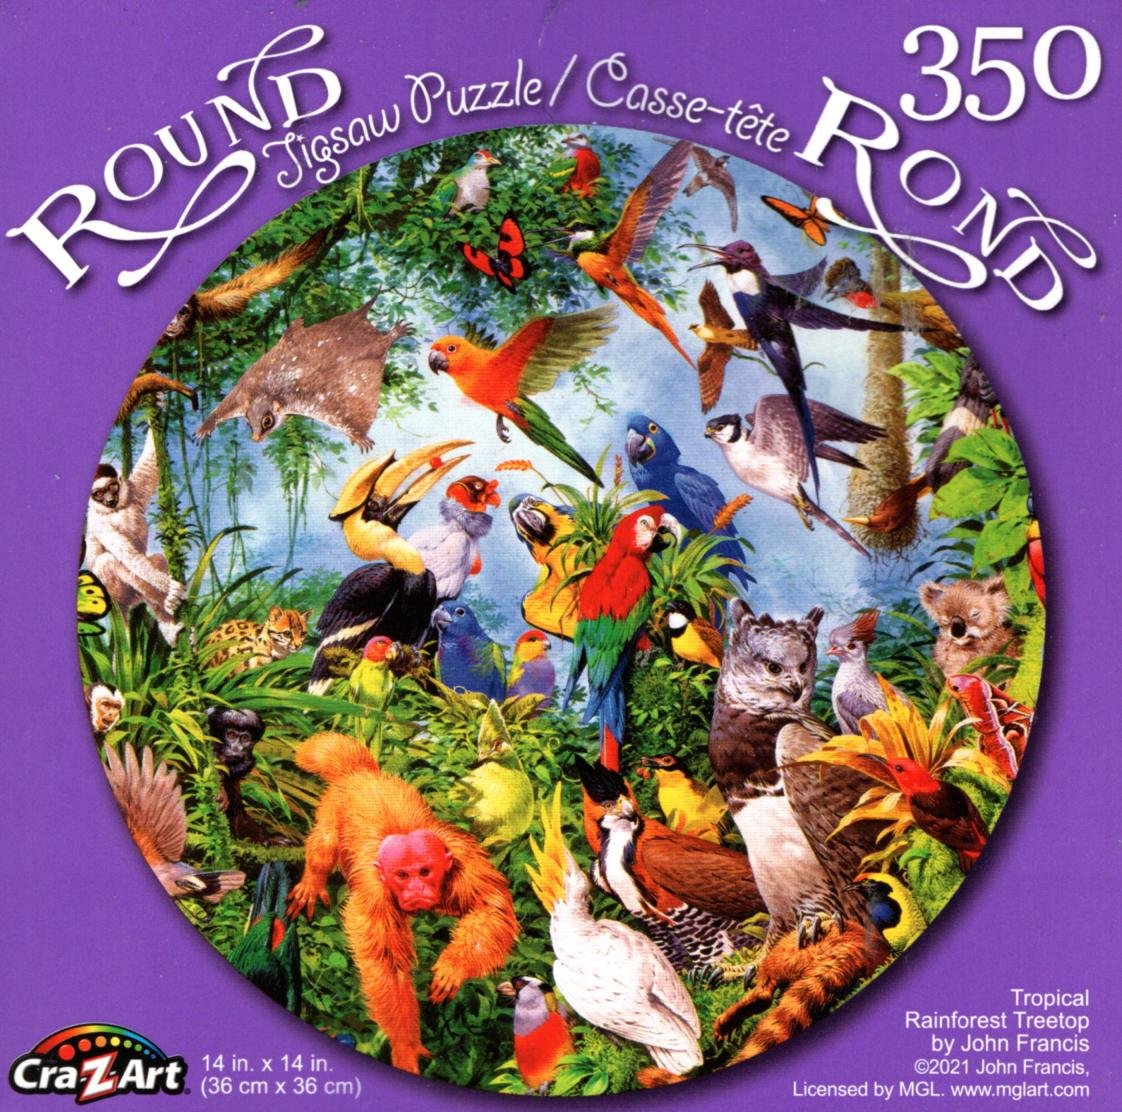 Tropical Rain-Forest Treetop by John Francis - 350 Round Piece Jigsaw Puzzle